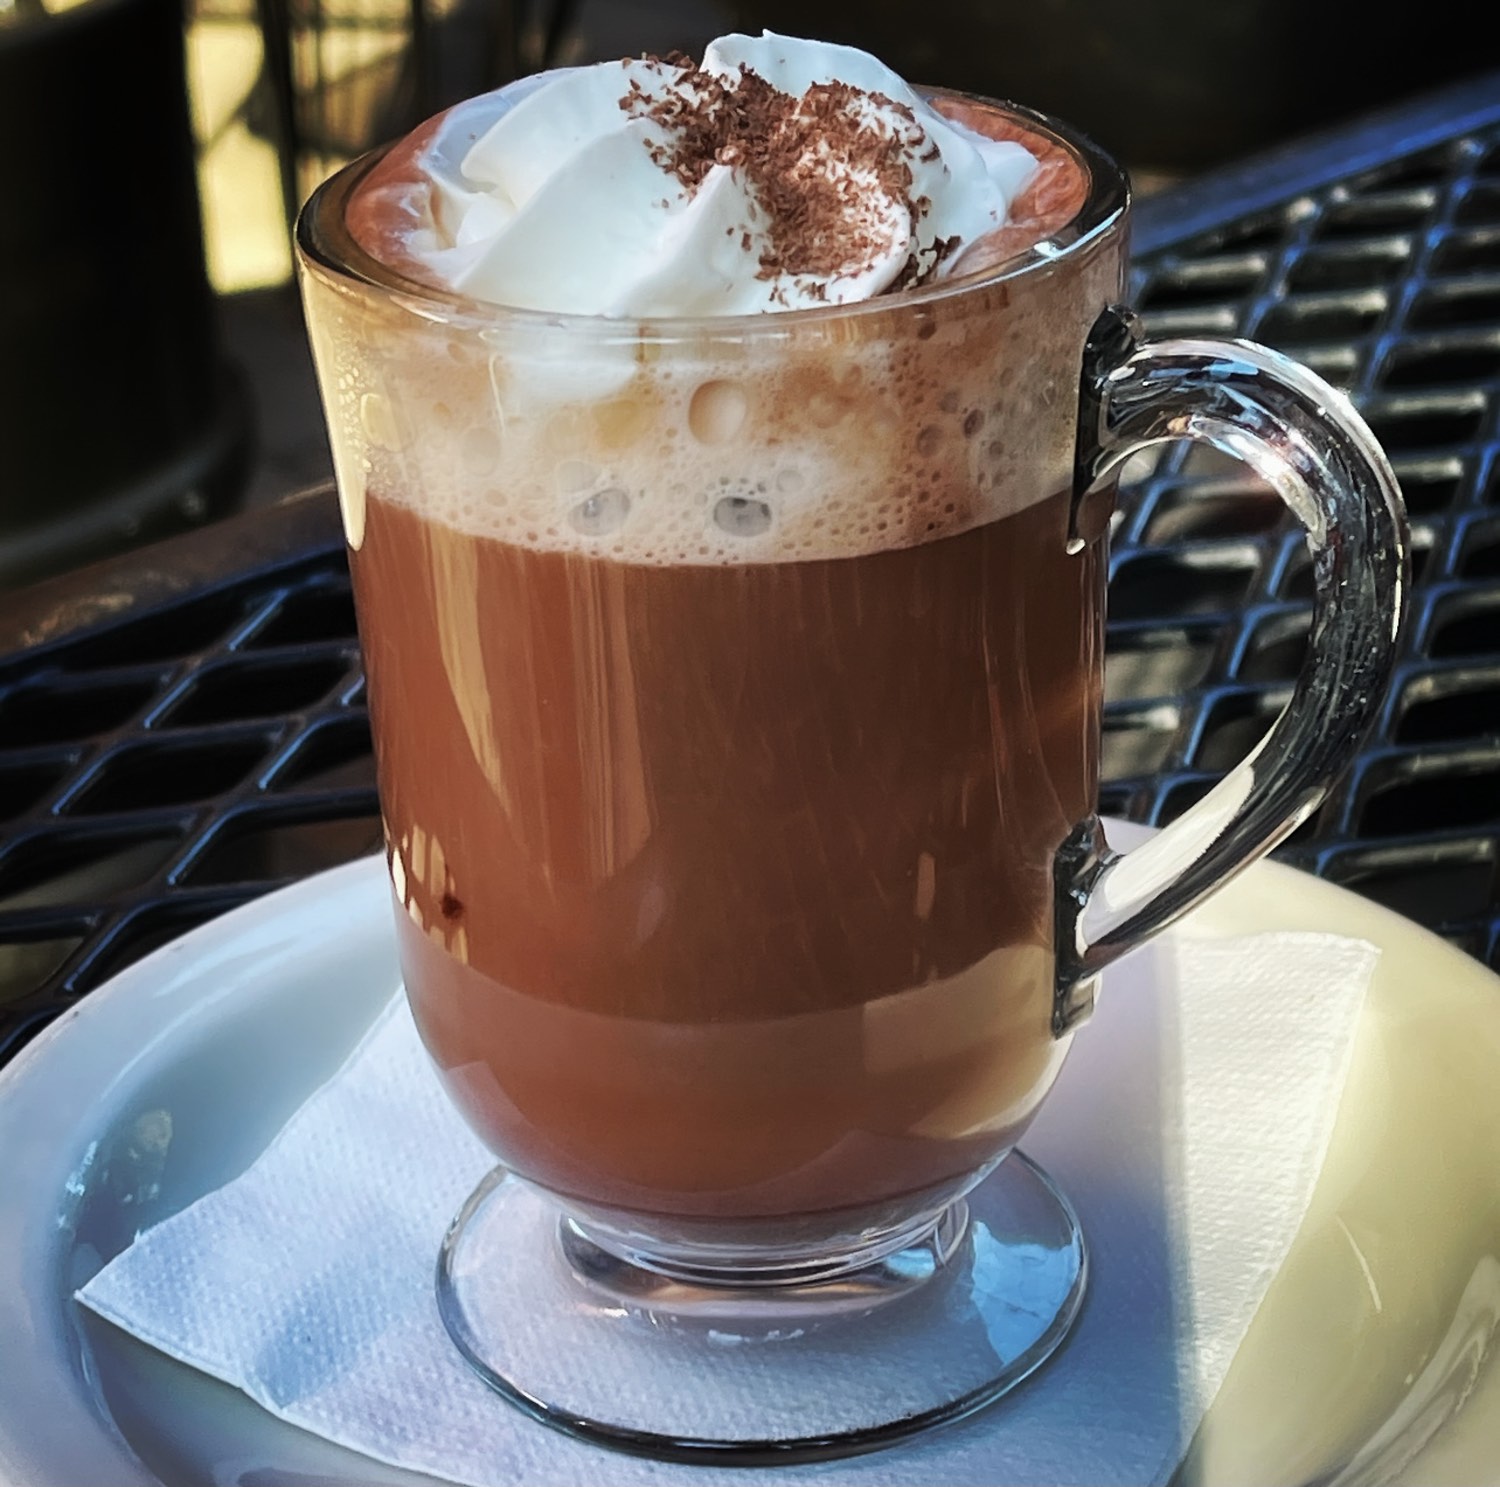 A Whiskey & Hot Chocolate Cocktail You Don’t Want to Miss – Three Creeks Brewing Sisters, Oregon This is Culinary Treasure Steven Shomler